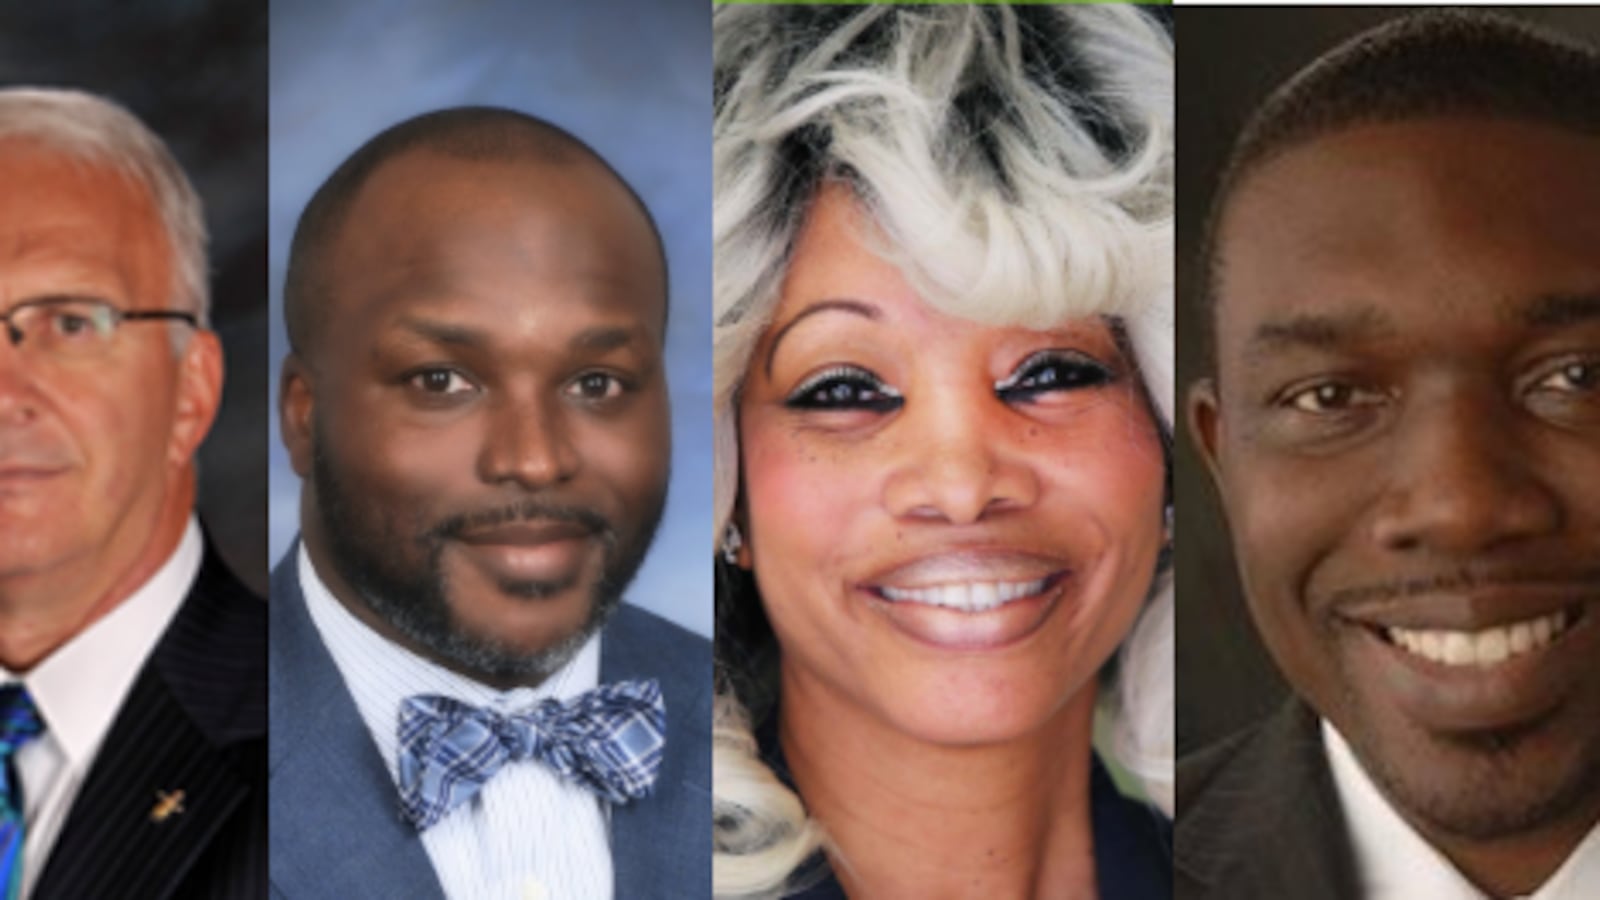 Hires from Tennessee superintendent searches in recent years, from left: Bob Thomas, Knox County Schools; Bryan Johnson, Hamilton County Schools; Sharon Griffin, Achievement School District; Shawn Joseph, Metro Nashville Public Schools.